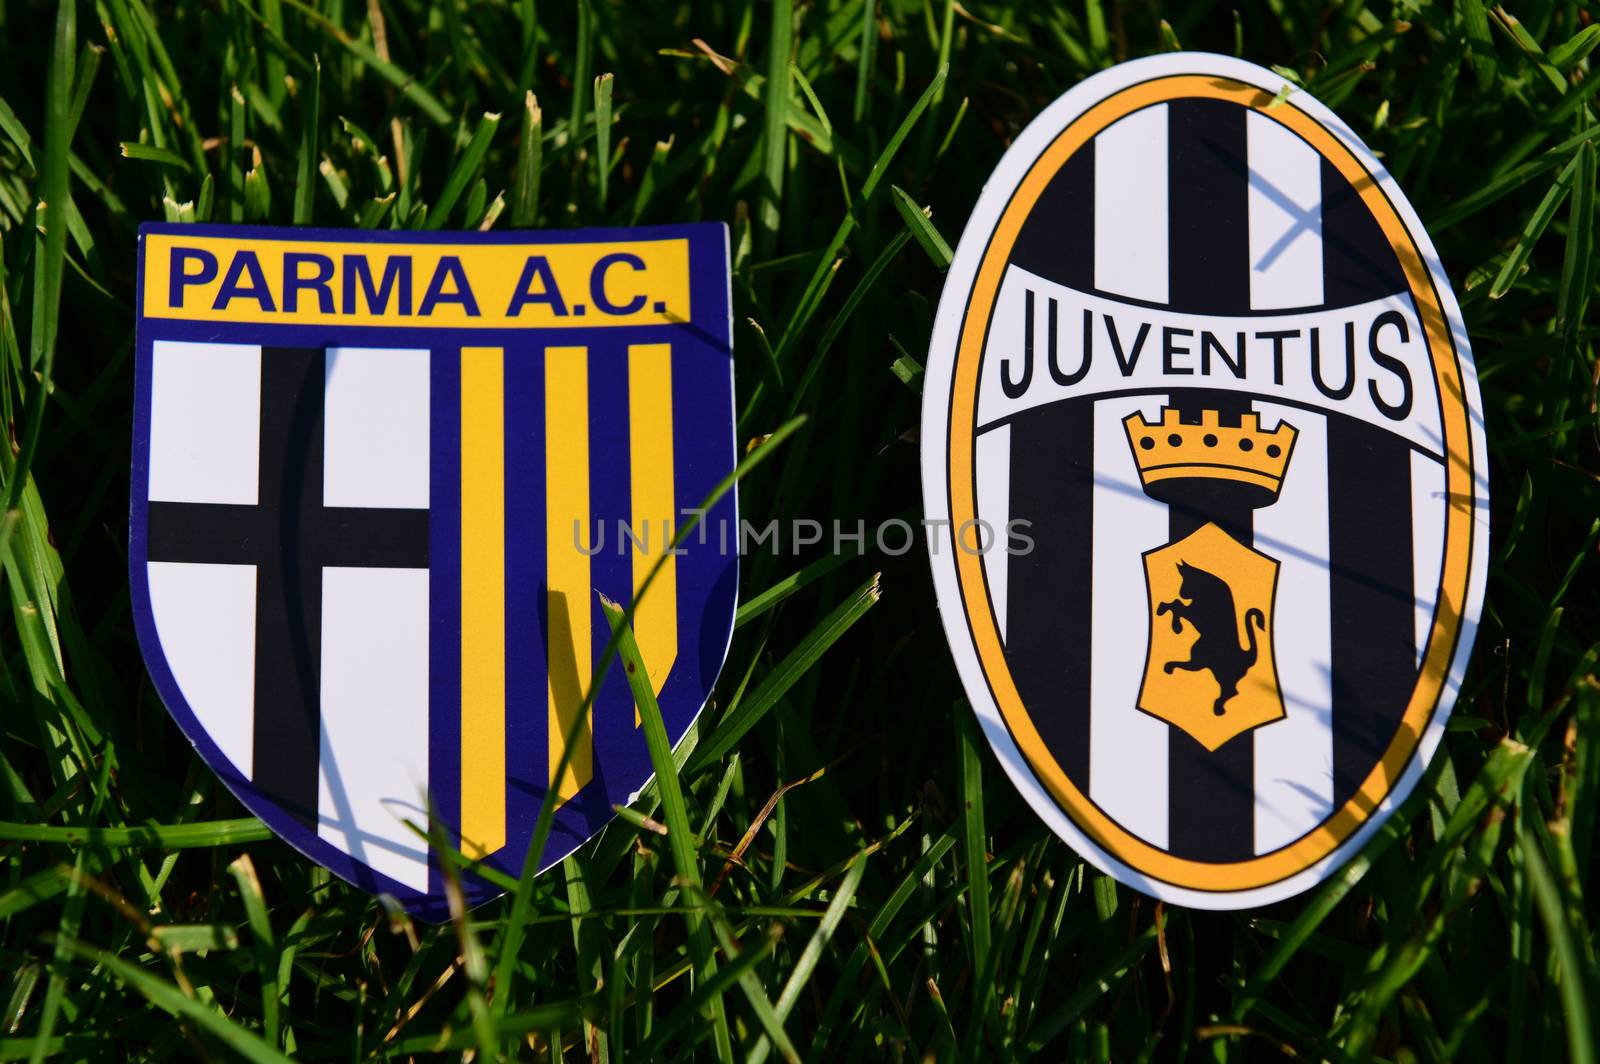 September 6, 2019, Turin, Italy. Emblems of Italian football clubs Juventus Turin and Parma on the green grass of the lawn.